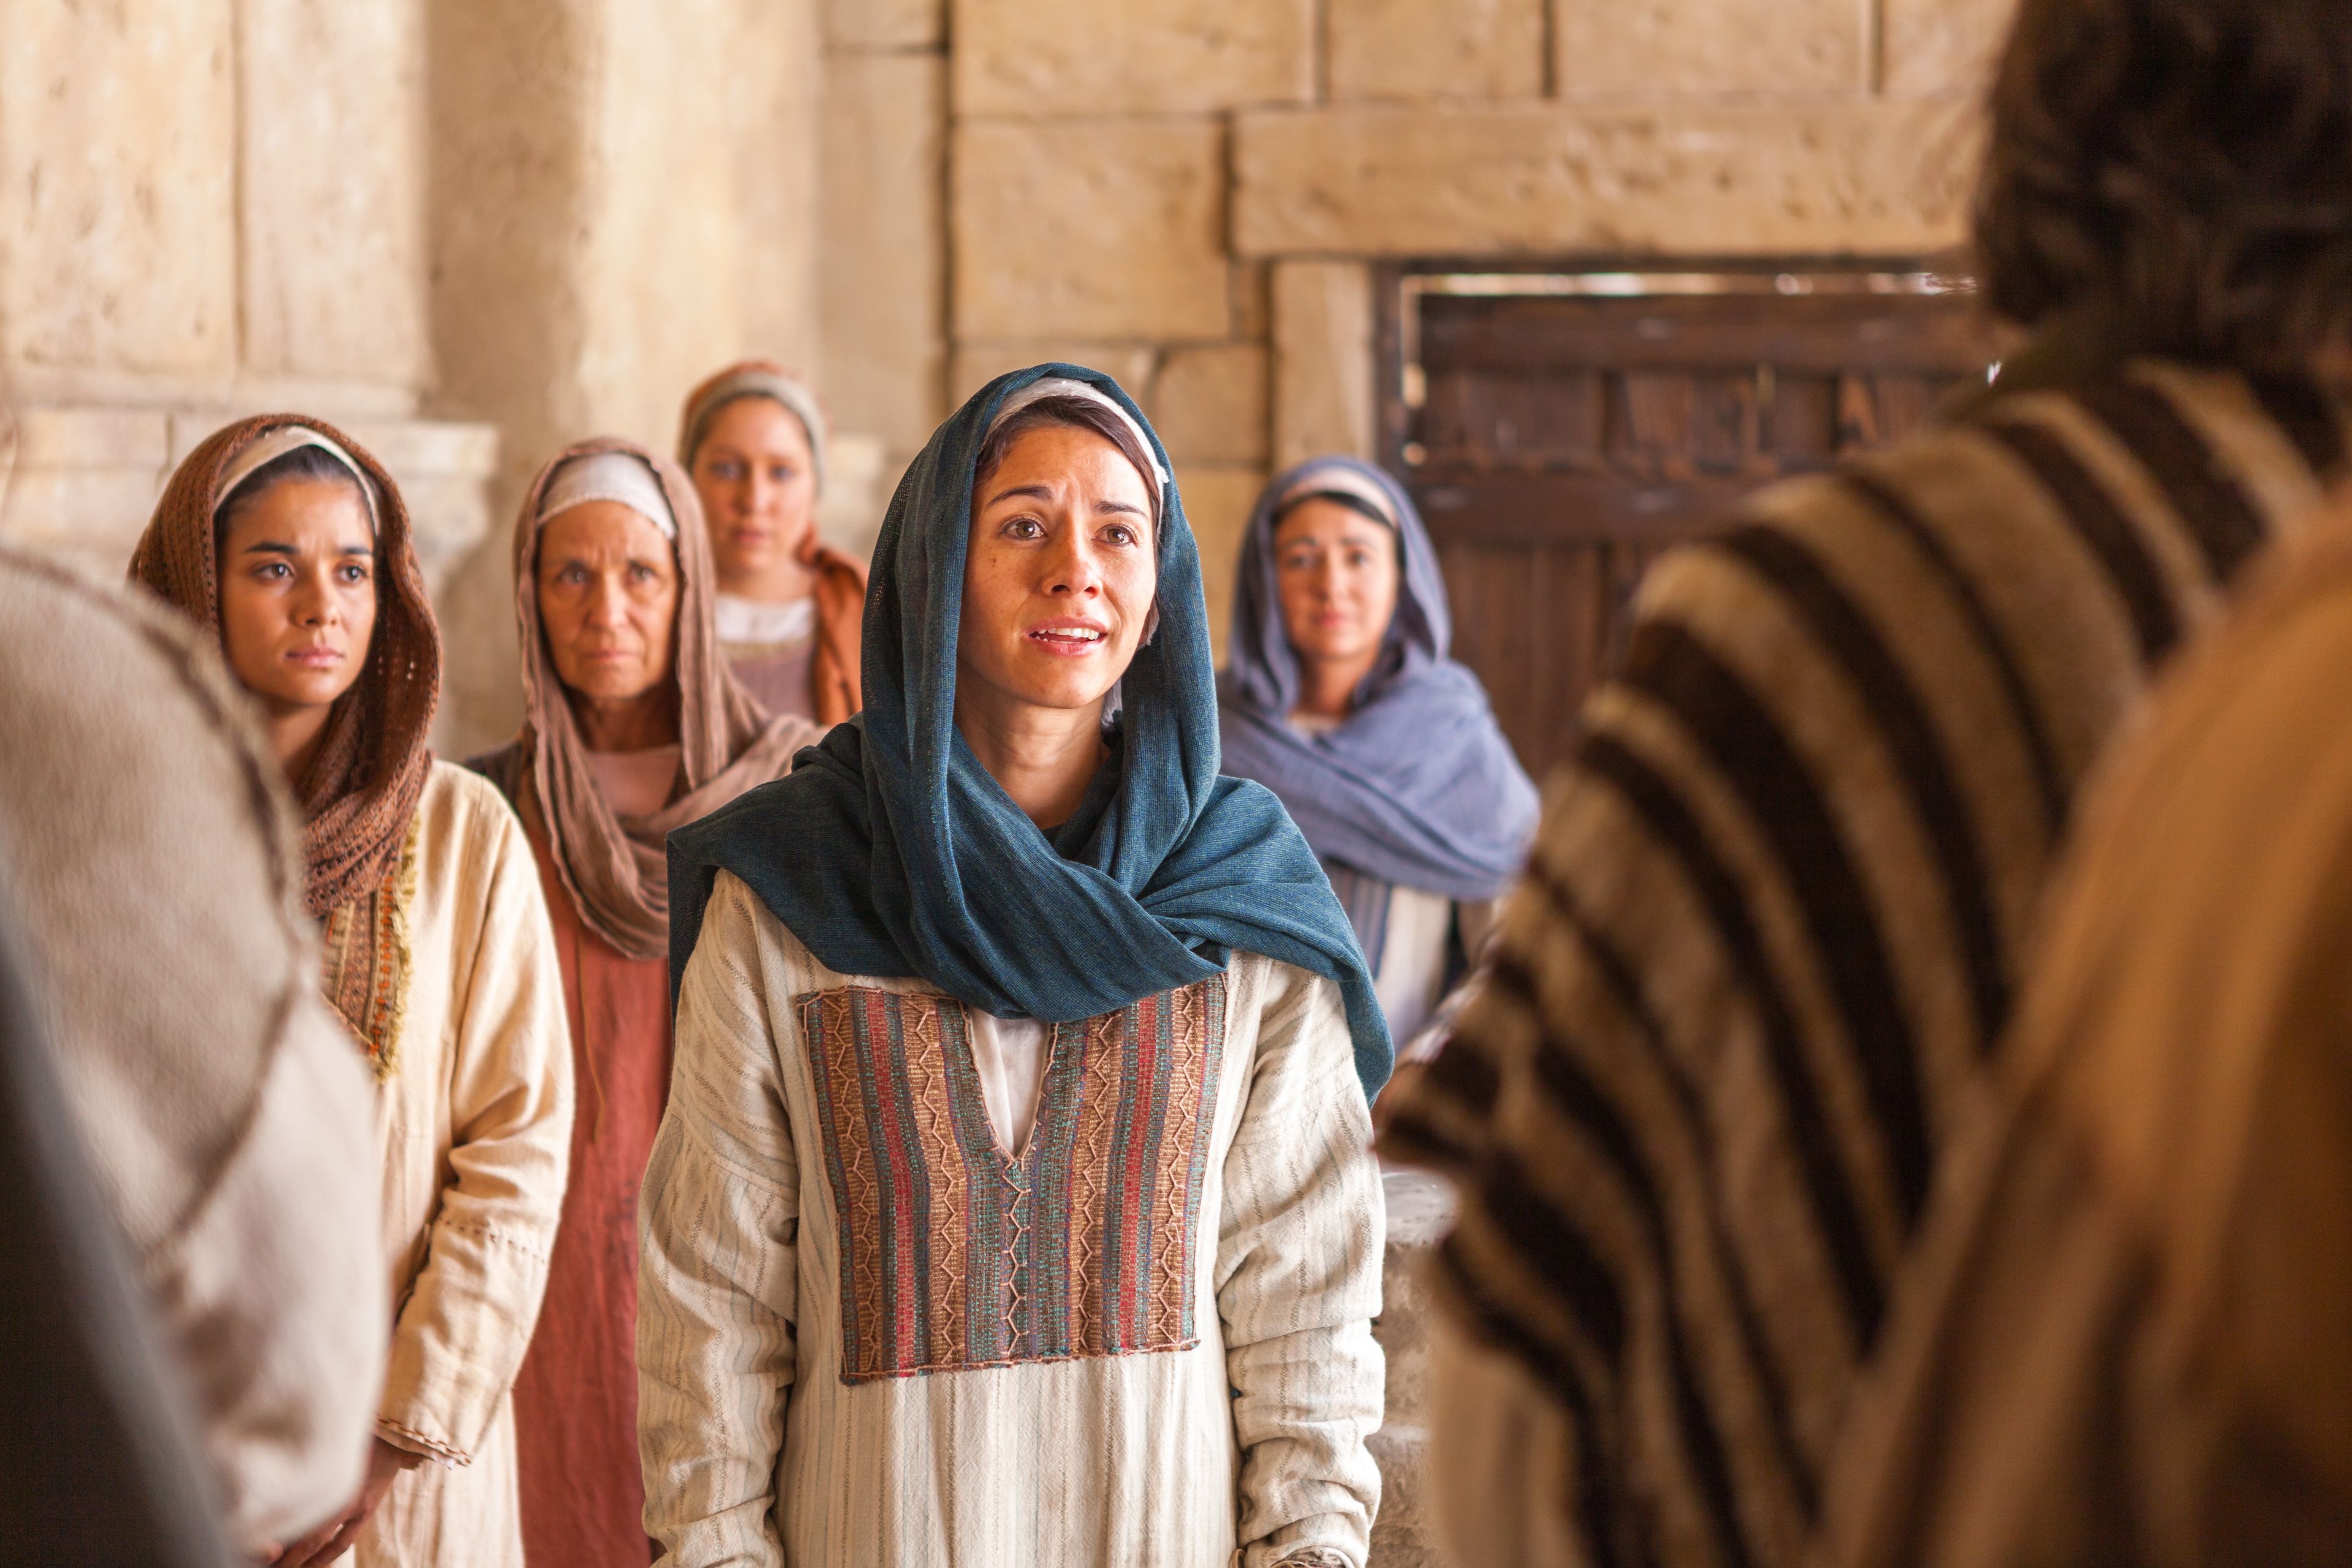 Mary Magdalene tells the disciples that she has seen the resurrected Savior.